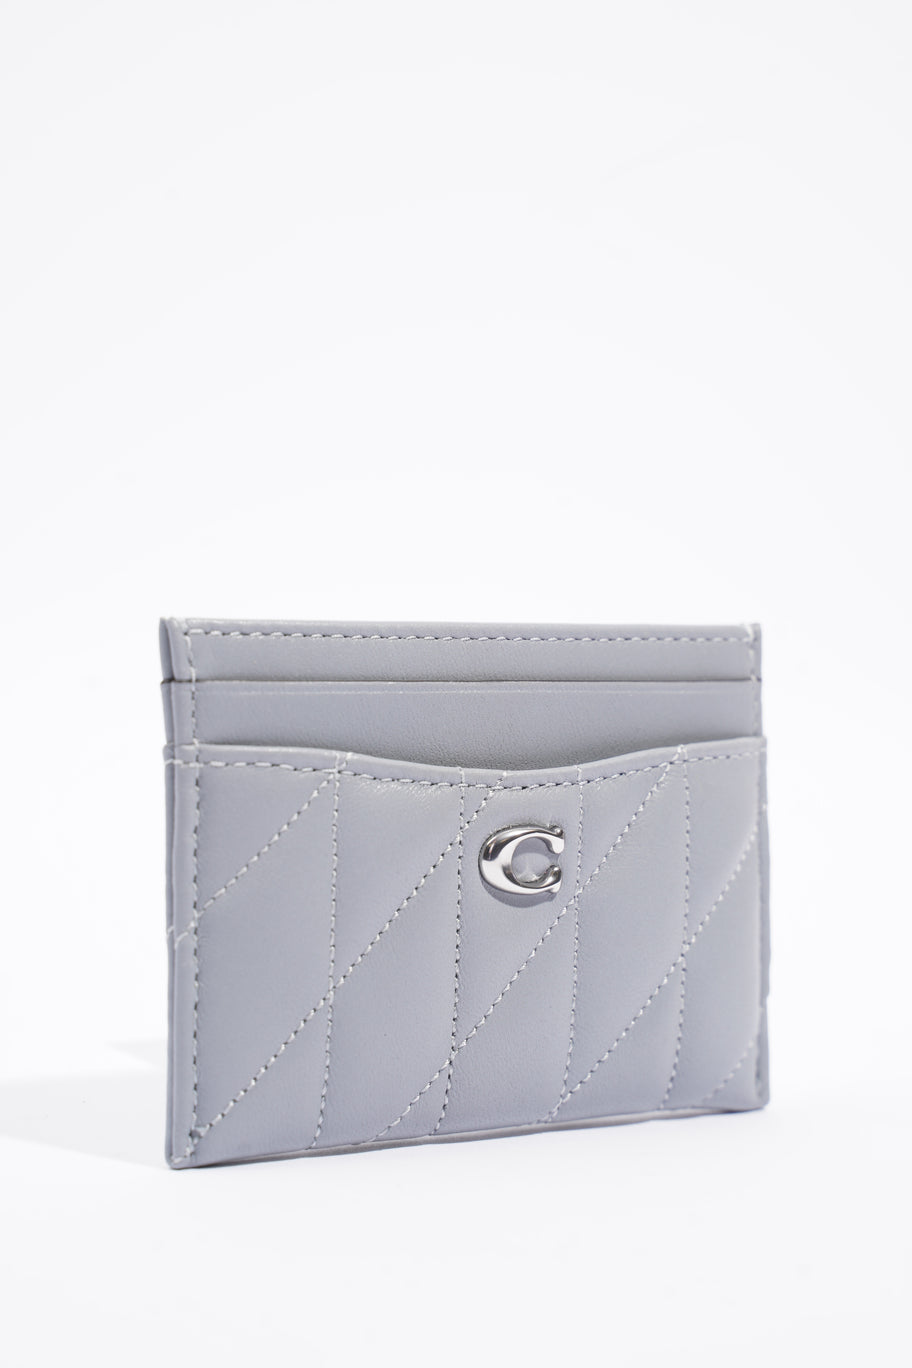 Essential Card Case Grey Lambskin Leather Image 5